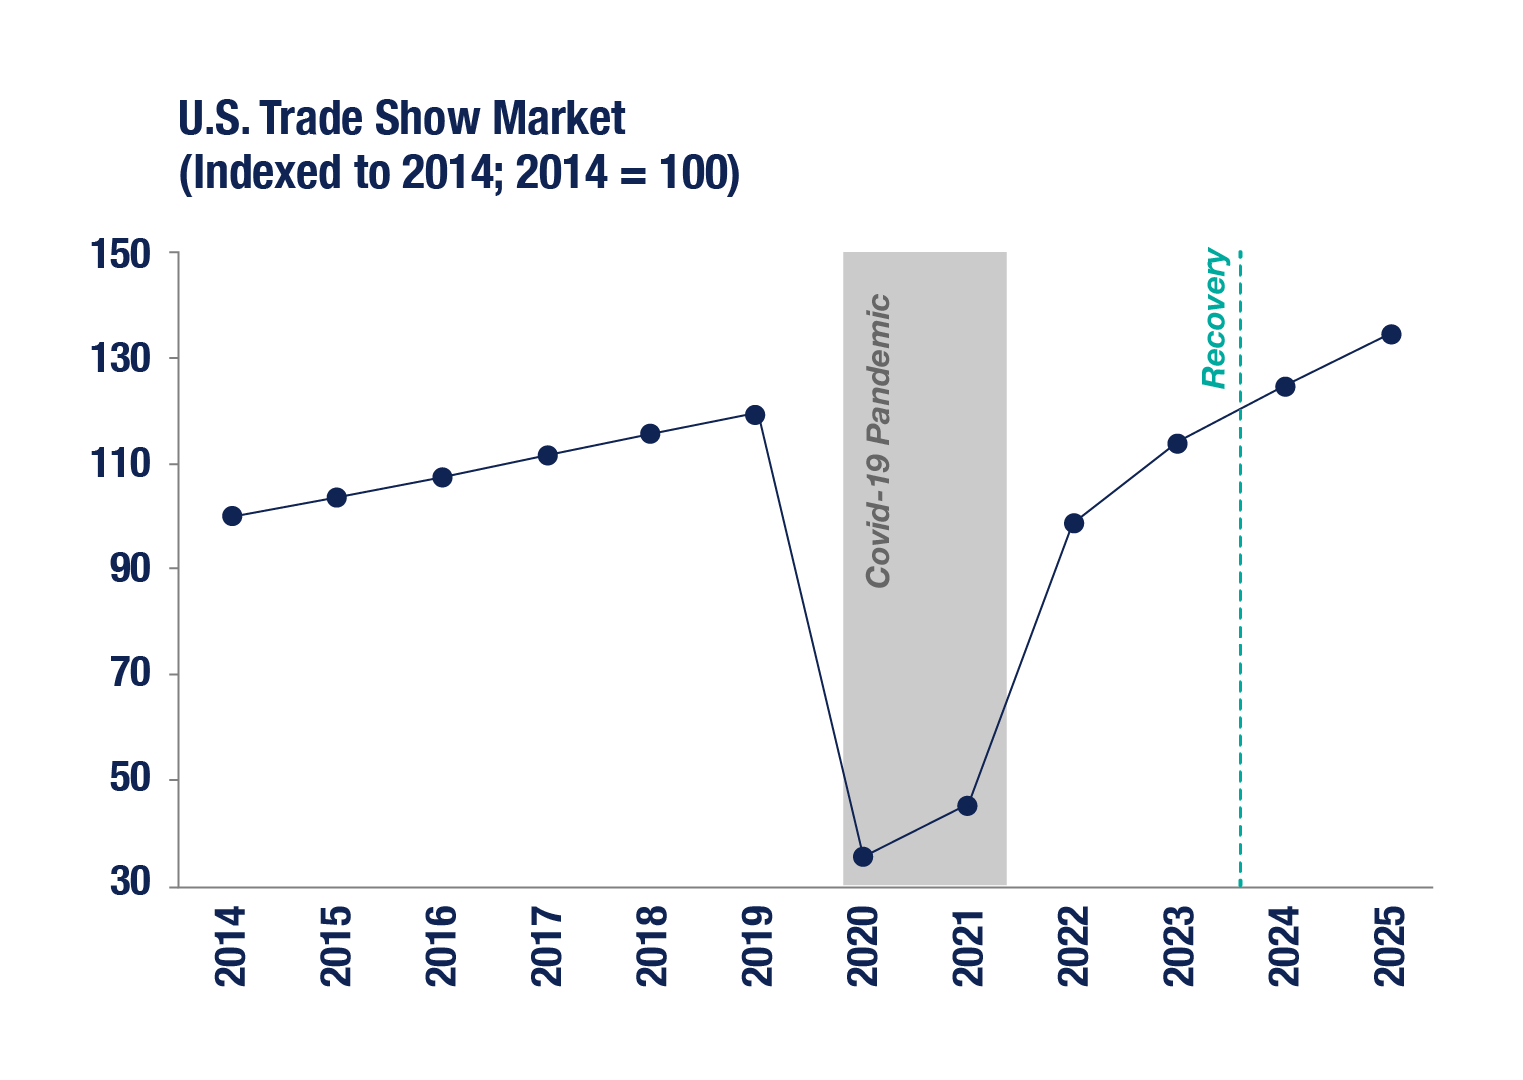 Graph #2 takes a closer look at the U.S. trade show market from 2014-2023, highlighting the most recent recession activity during Covid.